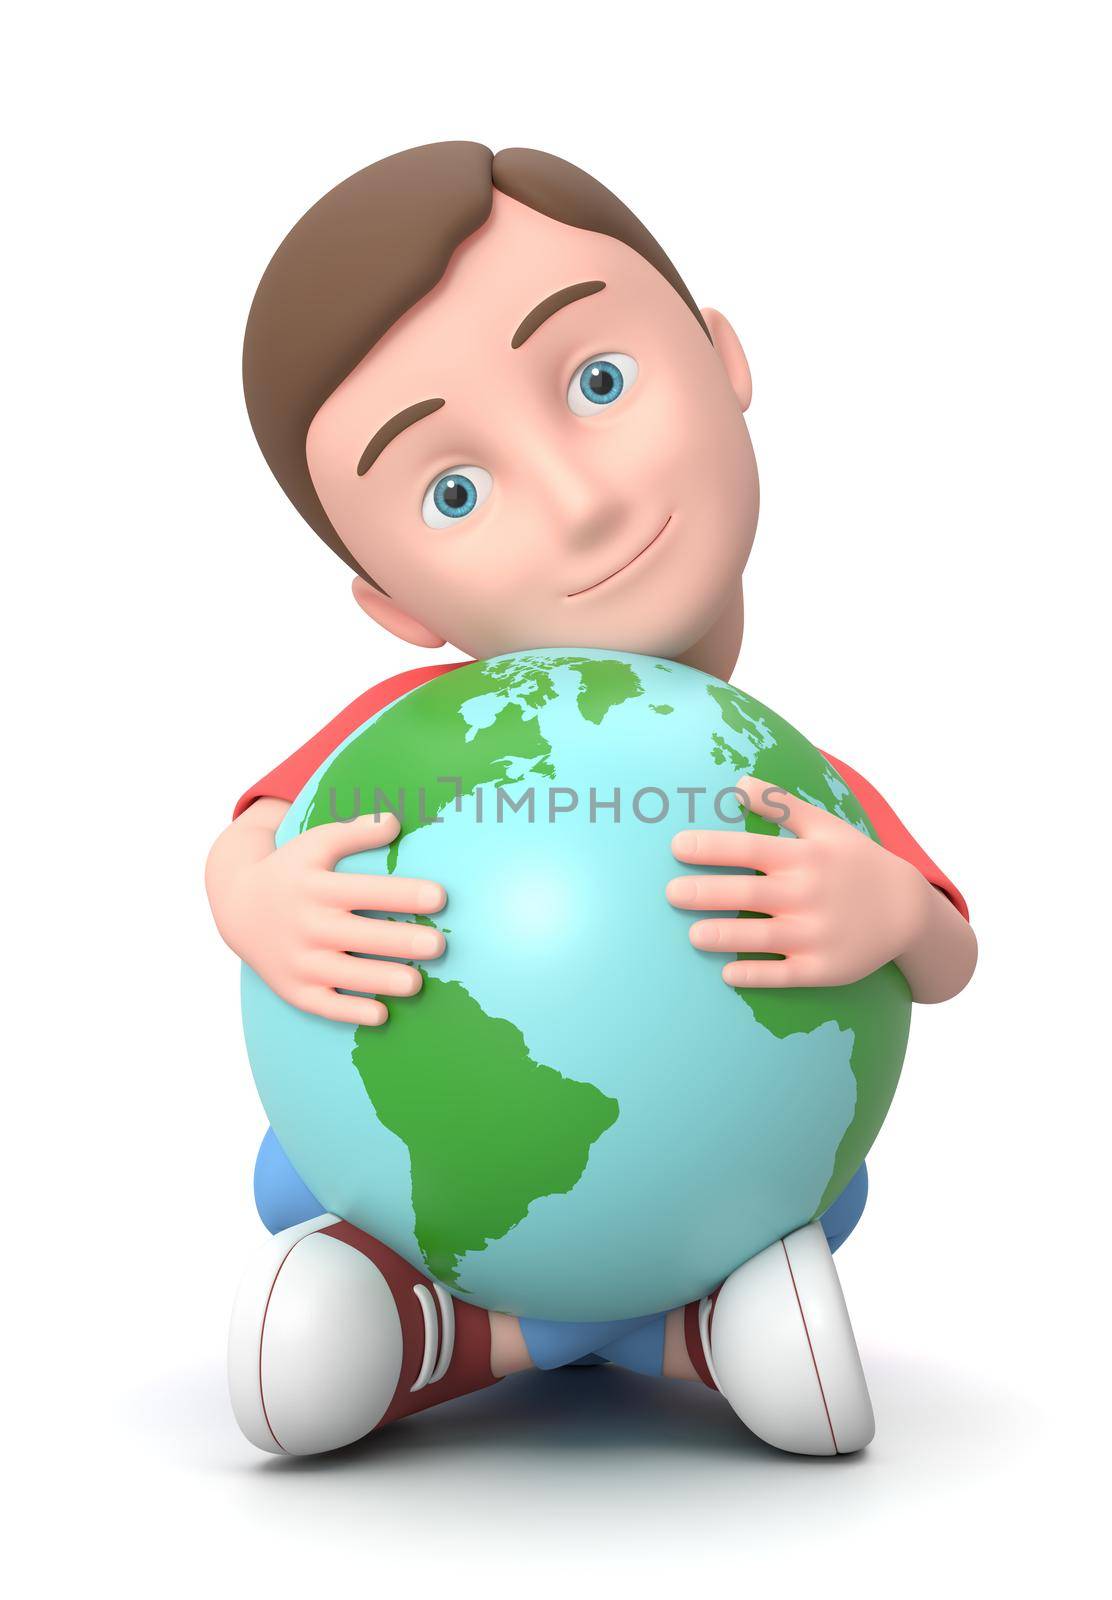 Cuddling the World. 3D Cartoon Character Illustration by make